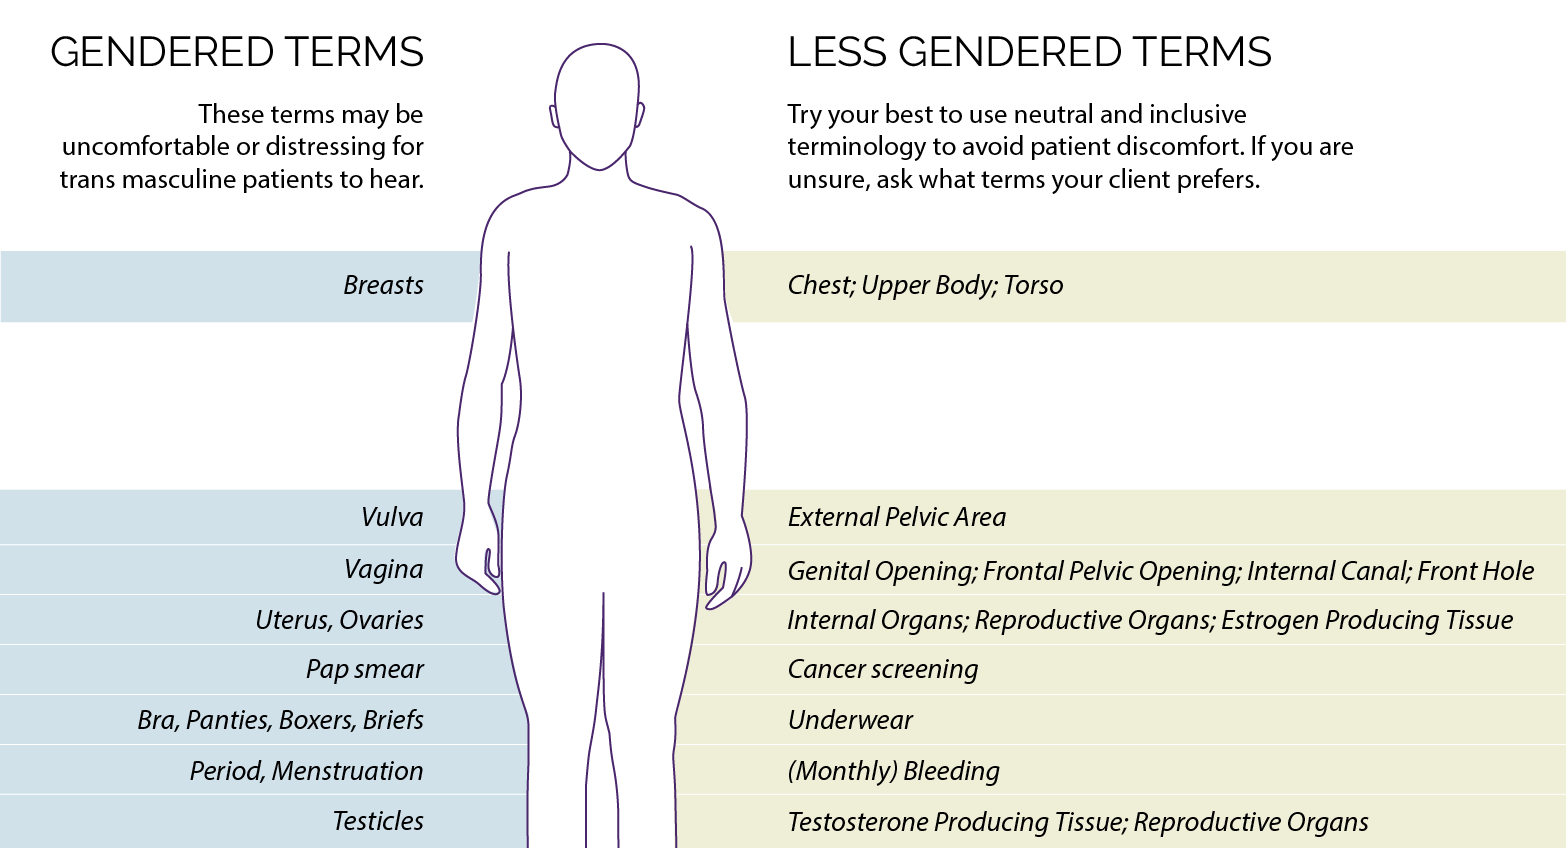 Illustrated diagram that explains what gendered terms to avoid when speaking with transmasculine patients (e.g. vulva, vagina, uterus, ovaries, pap smear, bra, panties, period, menstruation). Recommended, less-gendered terms are: e.g., chest, external pelvic area, genital opening, frontal pelvic opening, internal canal, internal organs, cancer screening, underwear, bleeding.